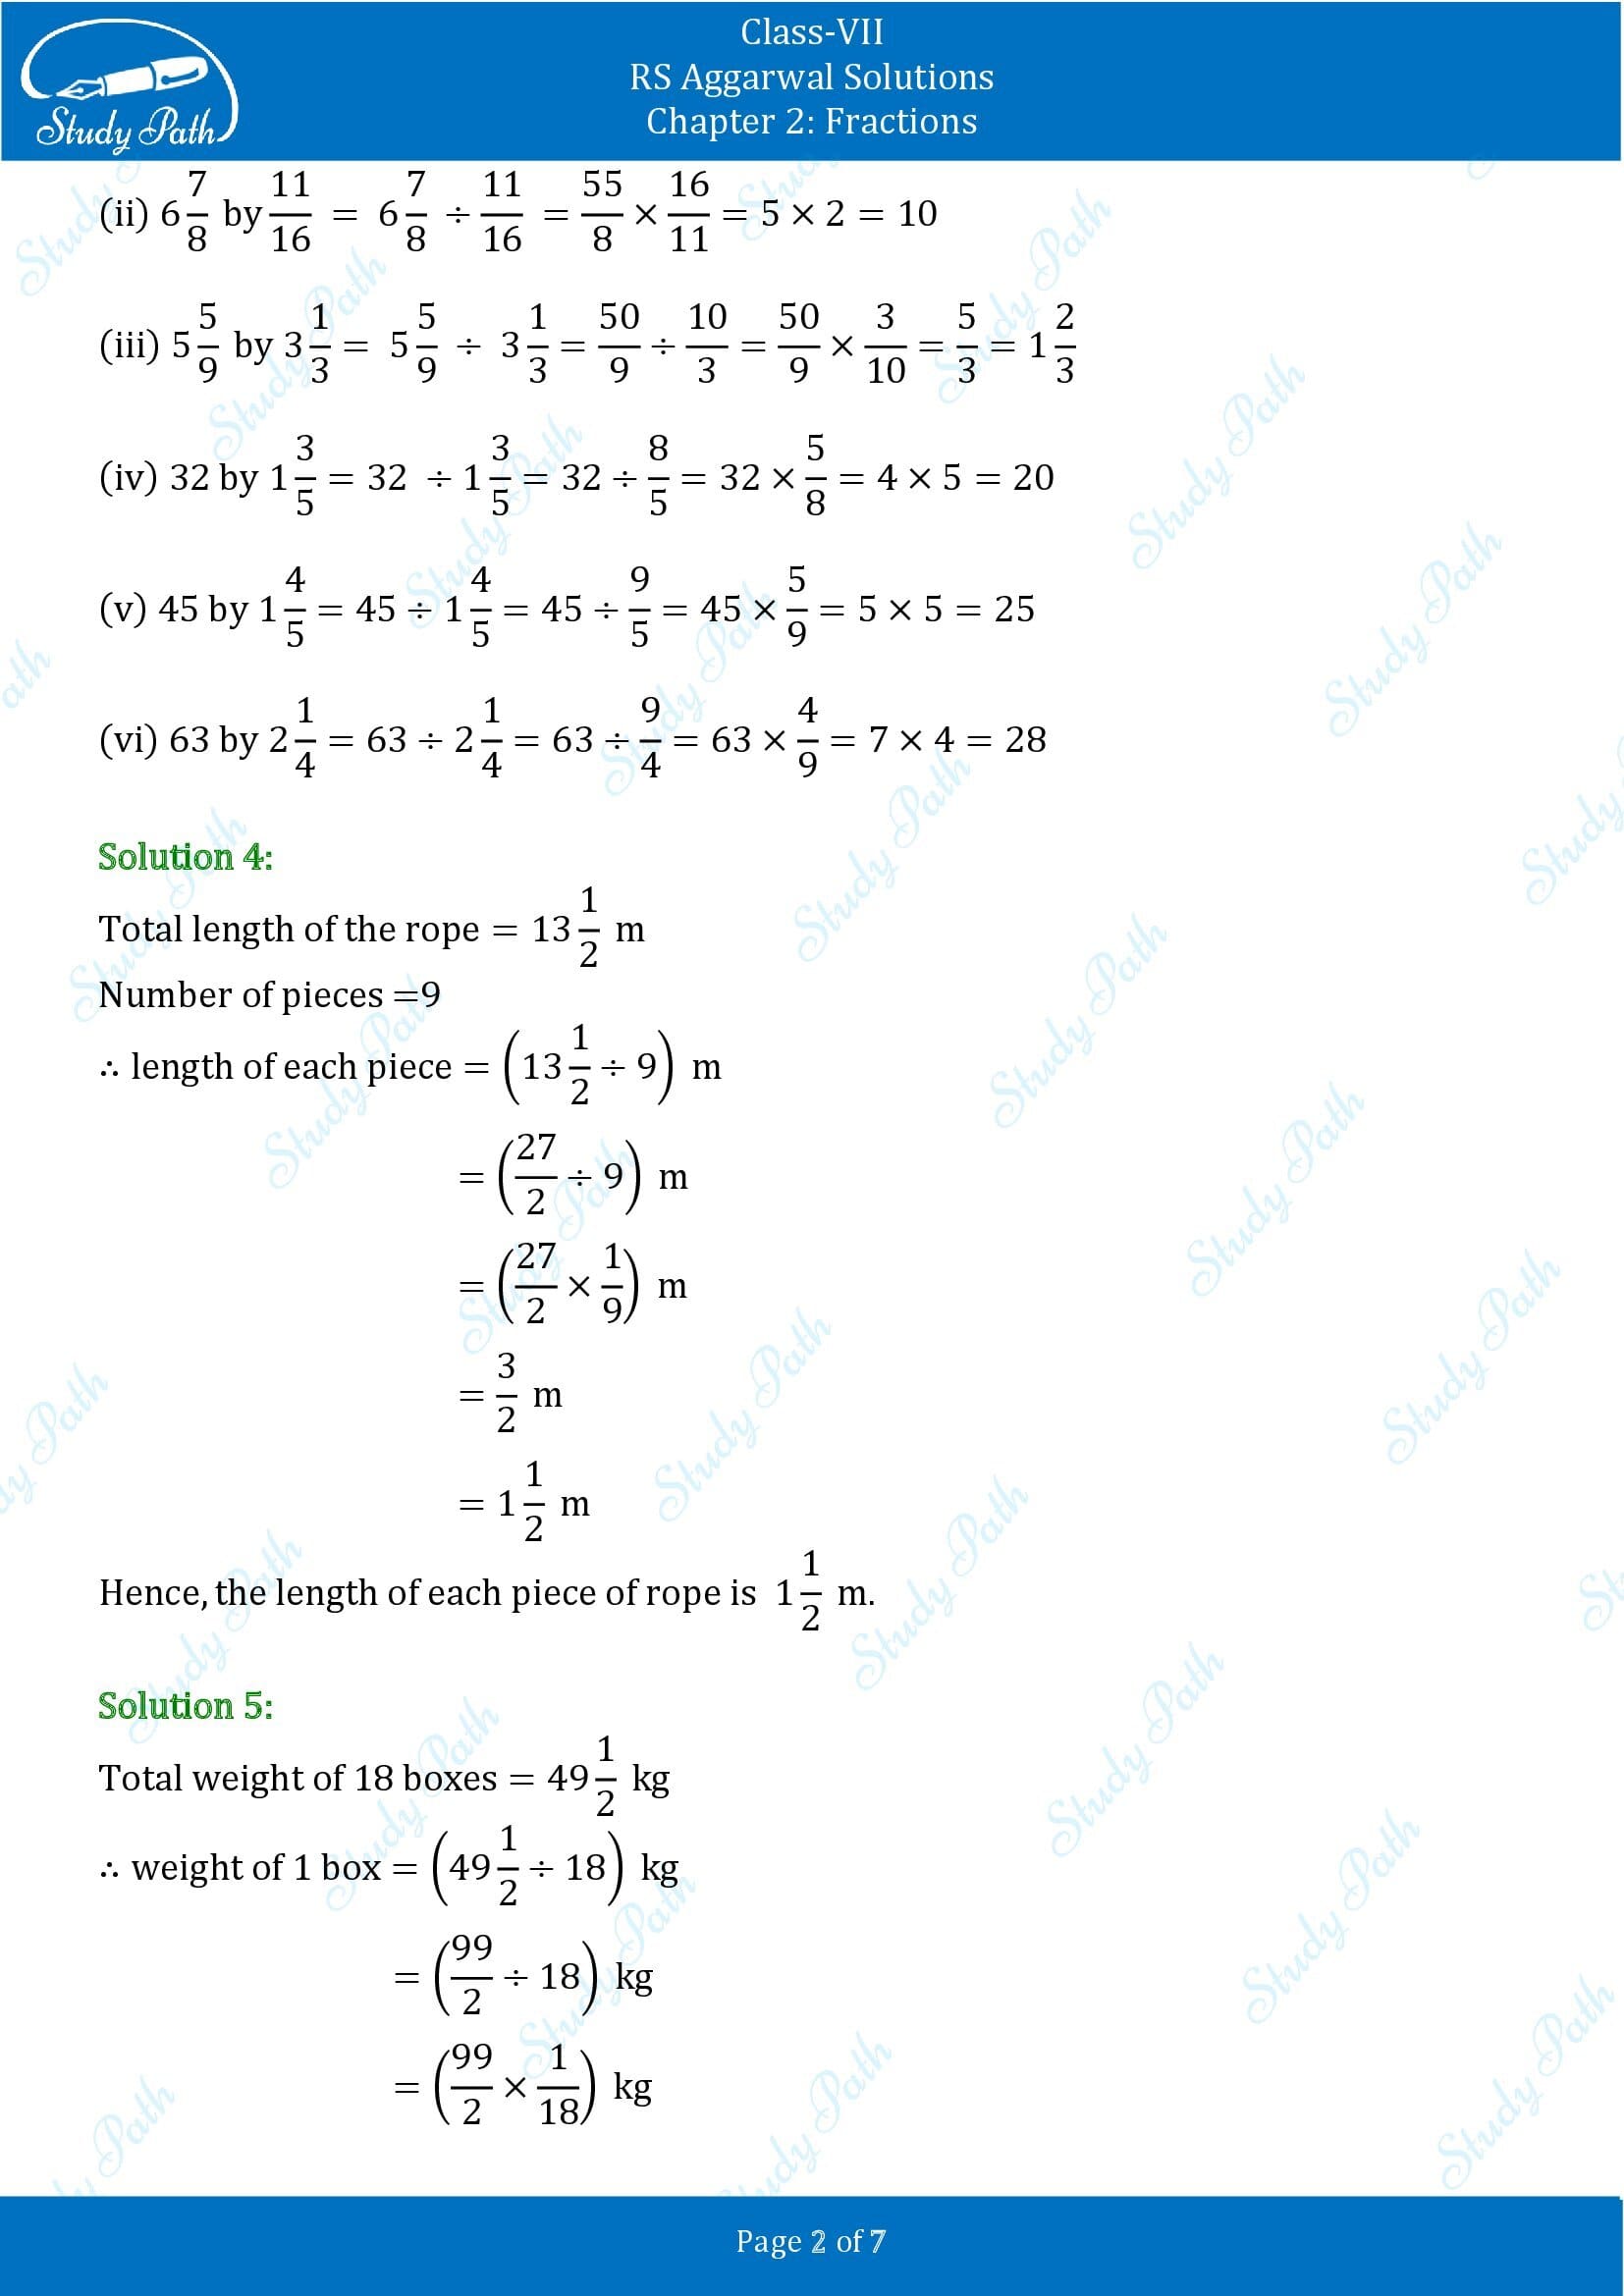 RS Aggarwal Solutions Class 7 Chapter 2 Fractions Exercise 2C 00002